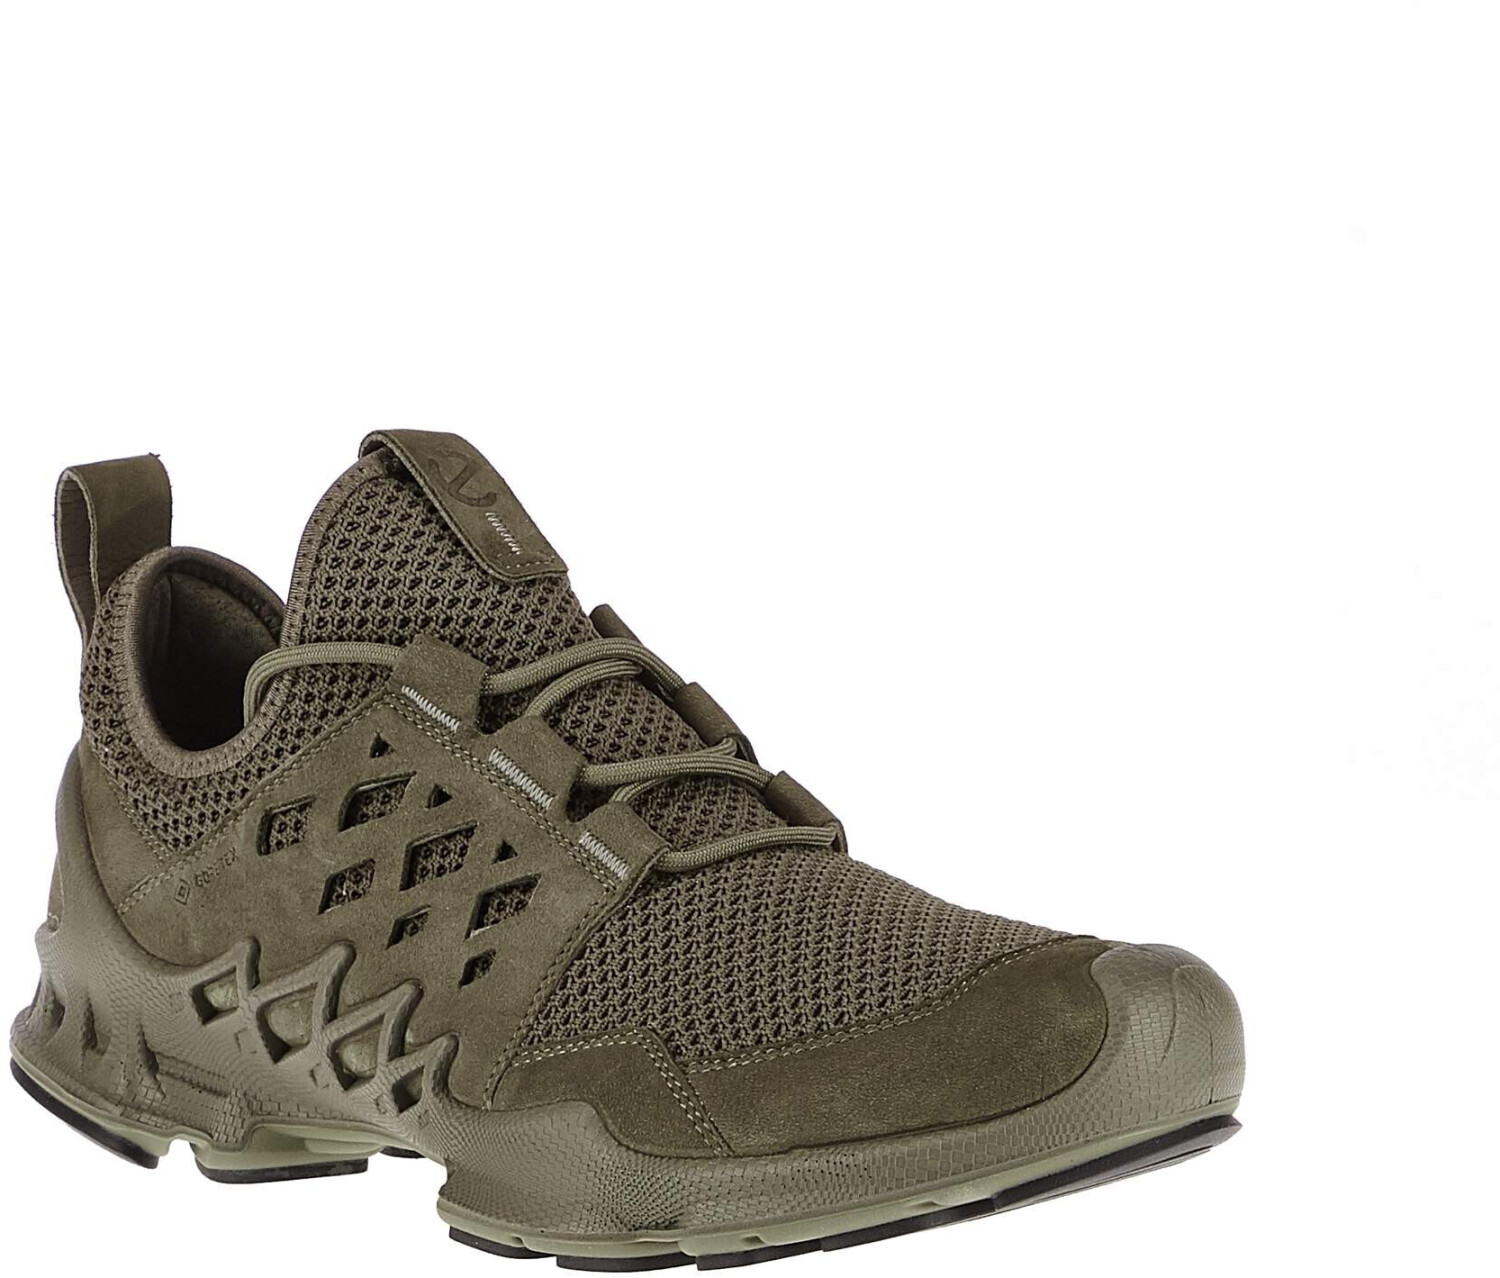 Buy Ecco Biom Aex Hiking (8028) dark clay from £121.00 (Today) – Best ...